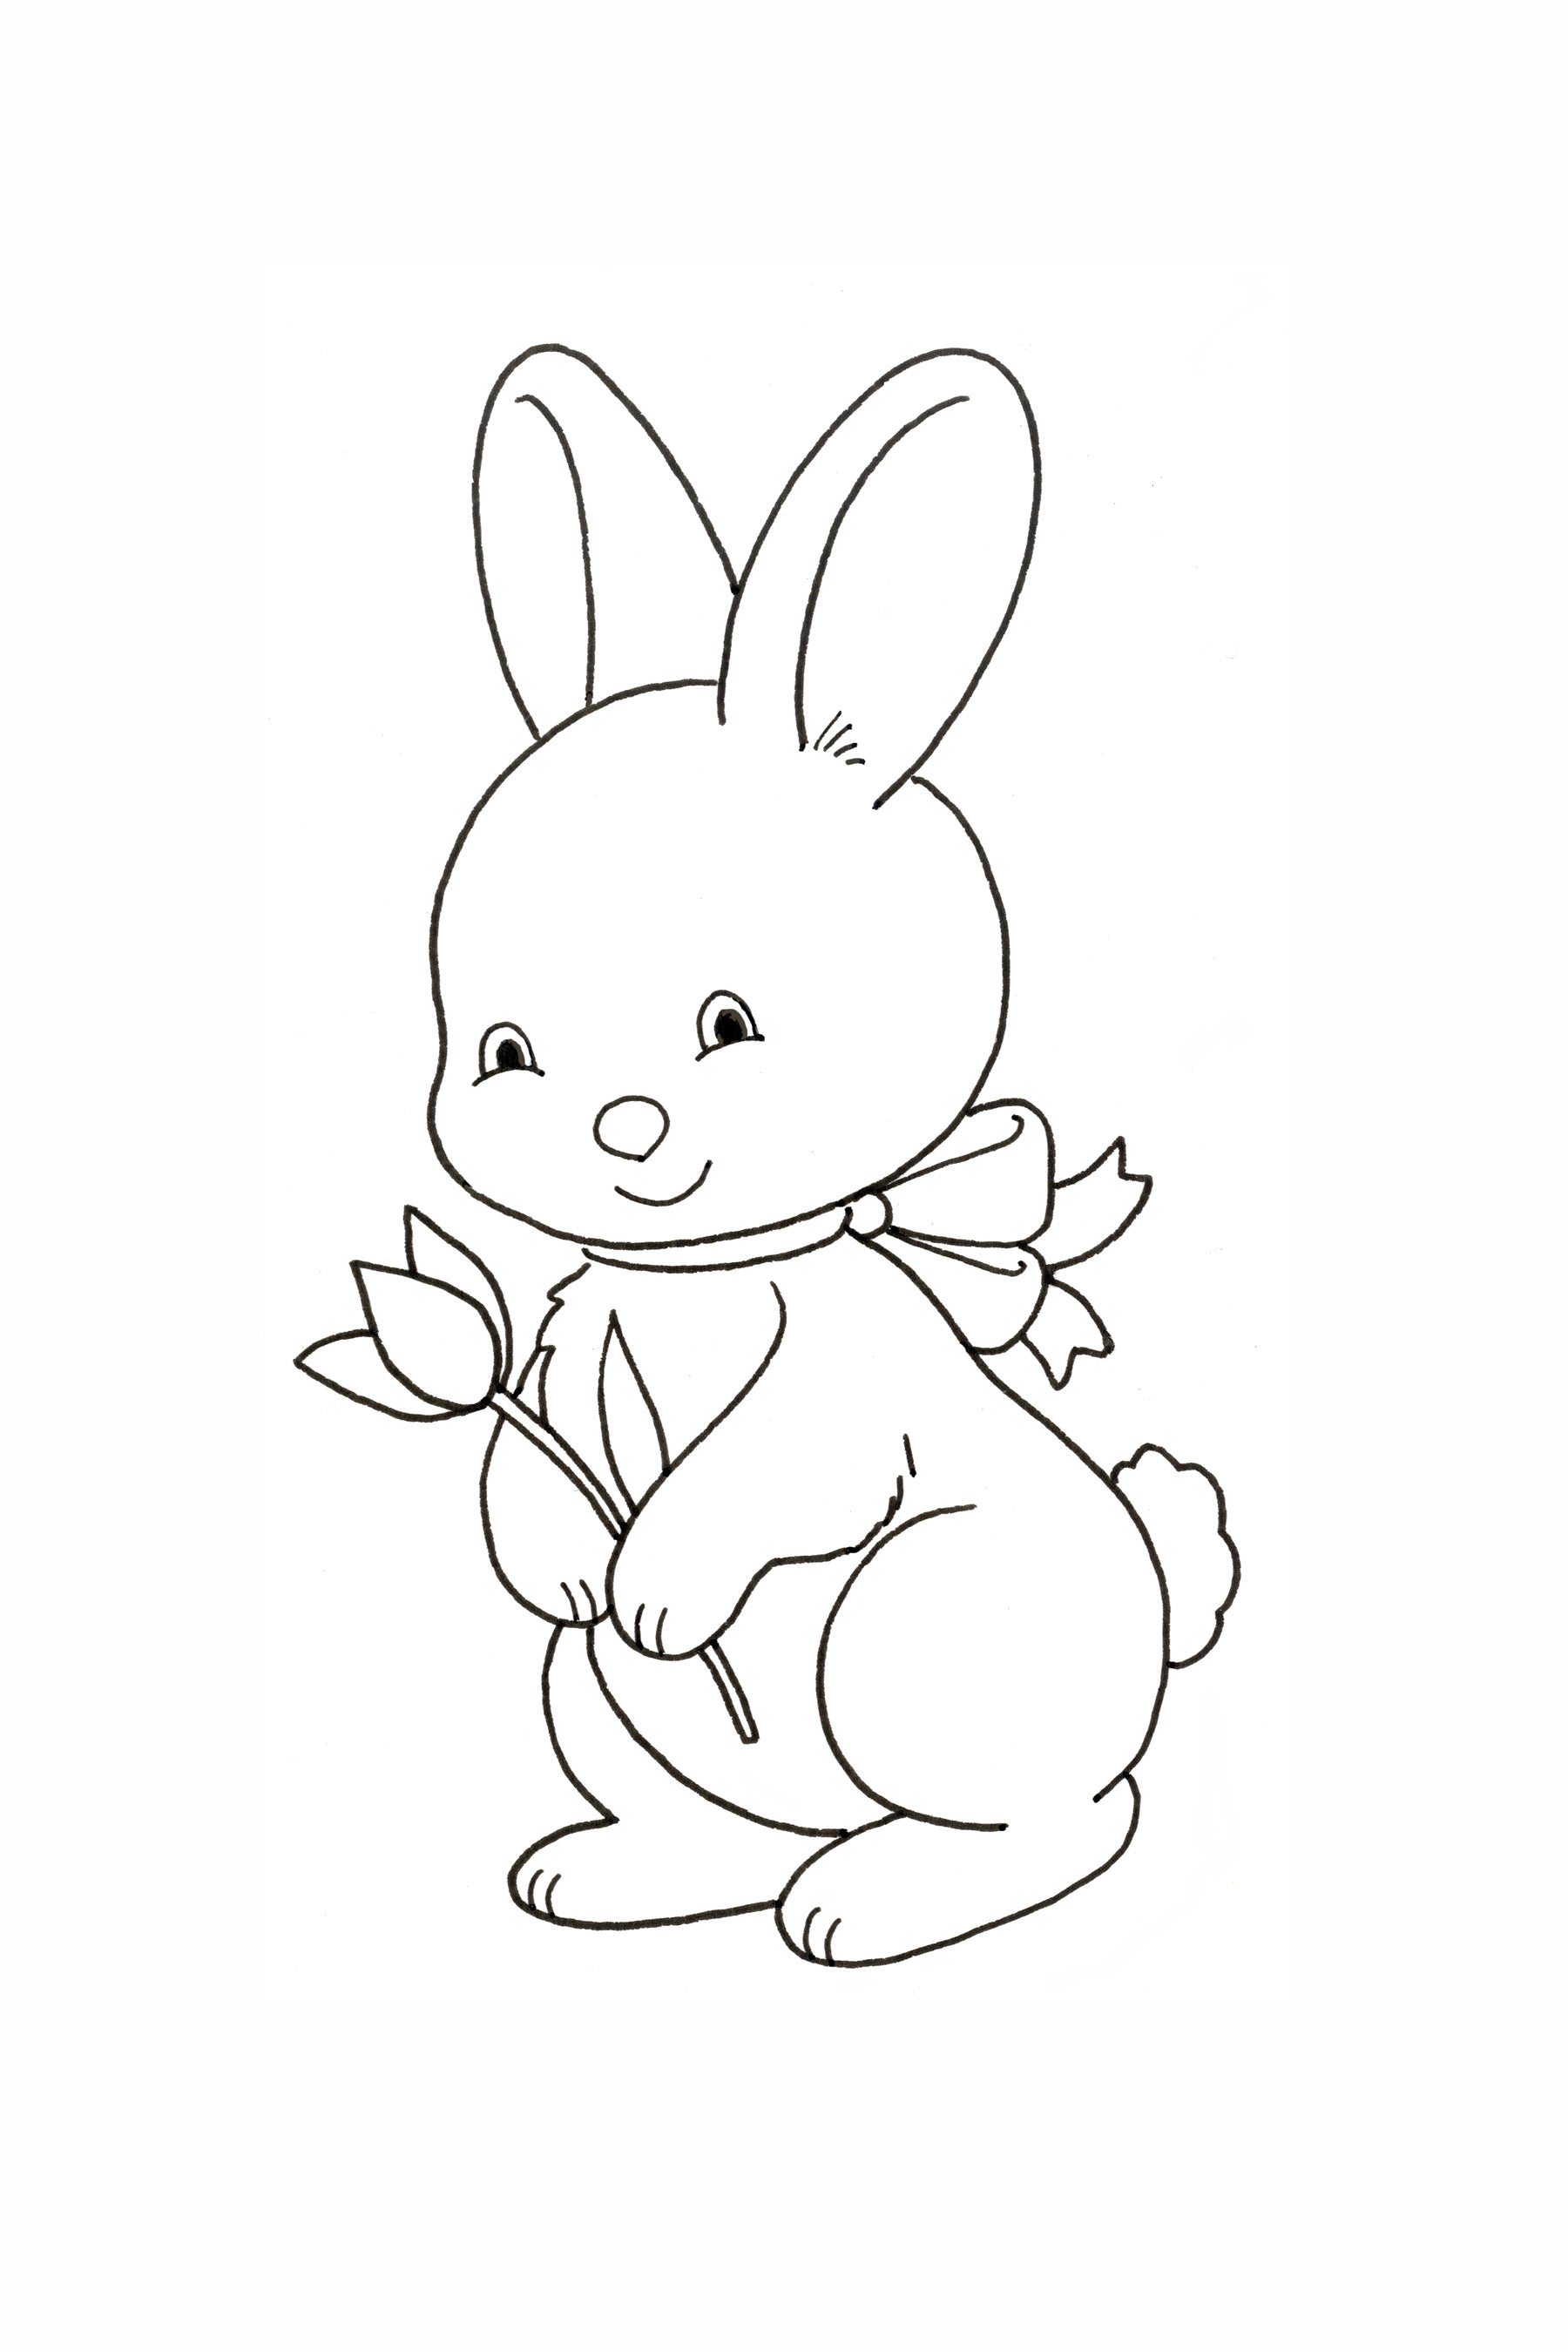 How to draw an easter bunny